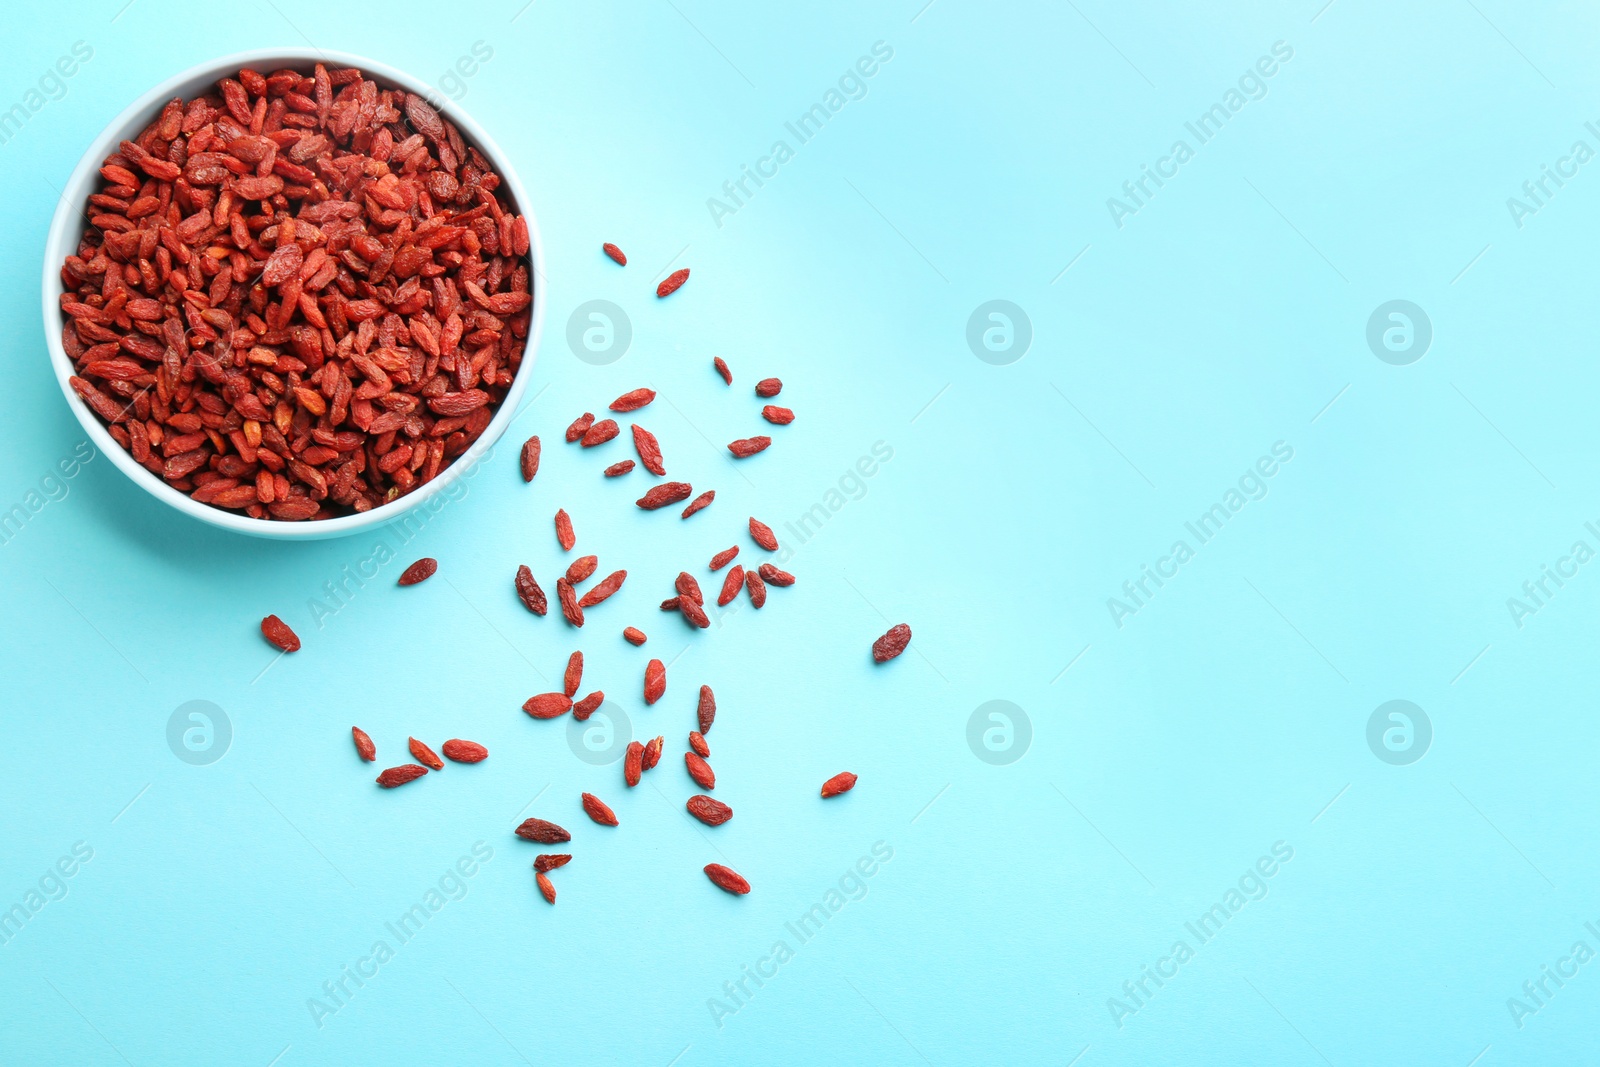 Photo of Bowl of dried goji berries on light blue background, top view with space for text. Healthy superfood